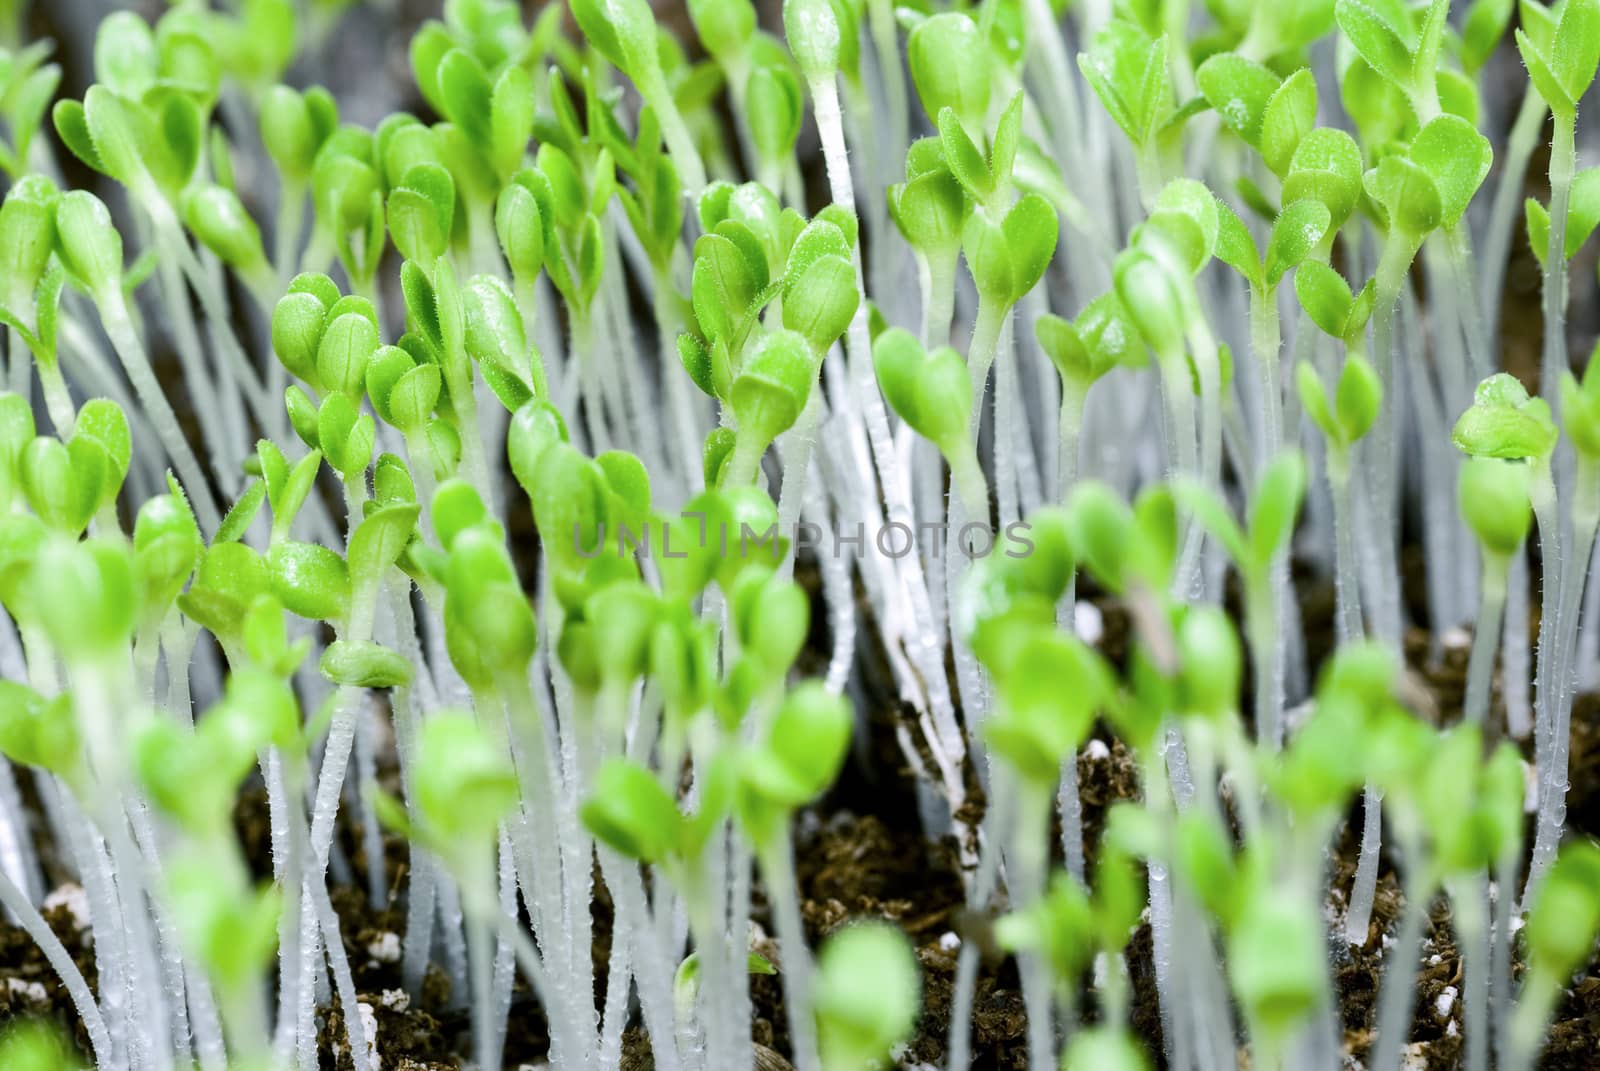 Seedlings Of Lettuce Close Up by stockbuster1